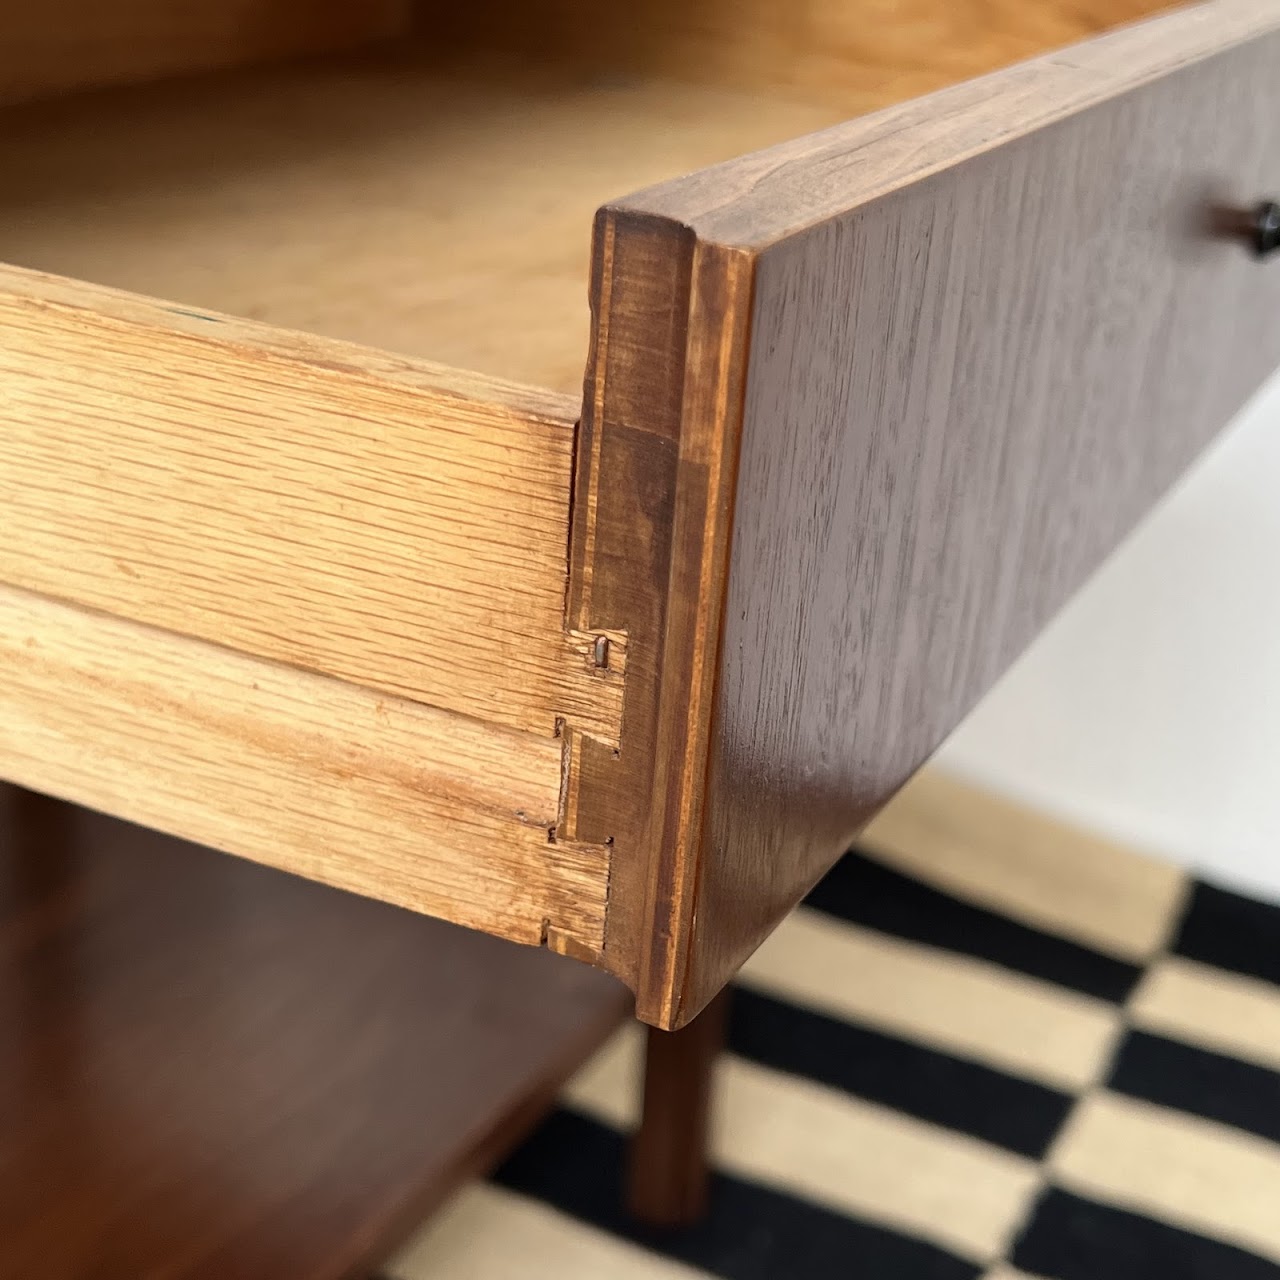 Jack Cartwright for Founders Mid-Century Walnut Side Table